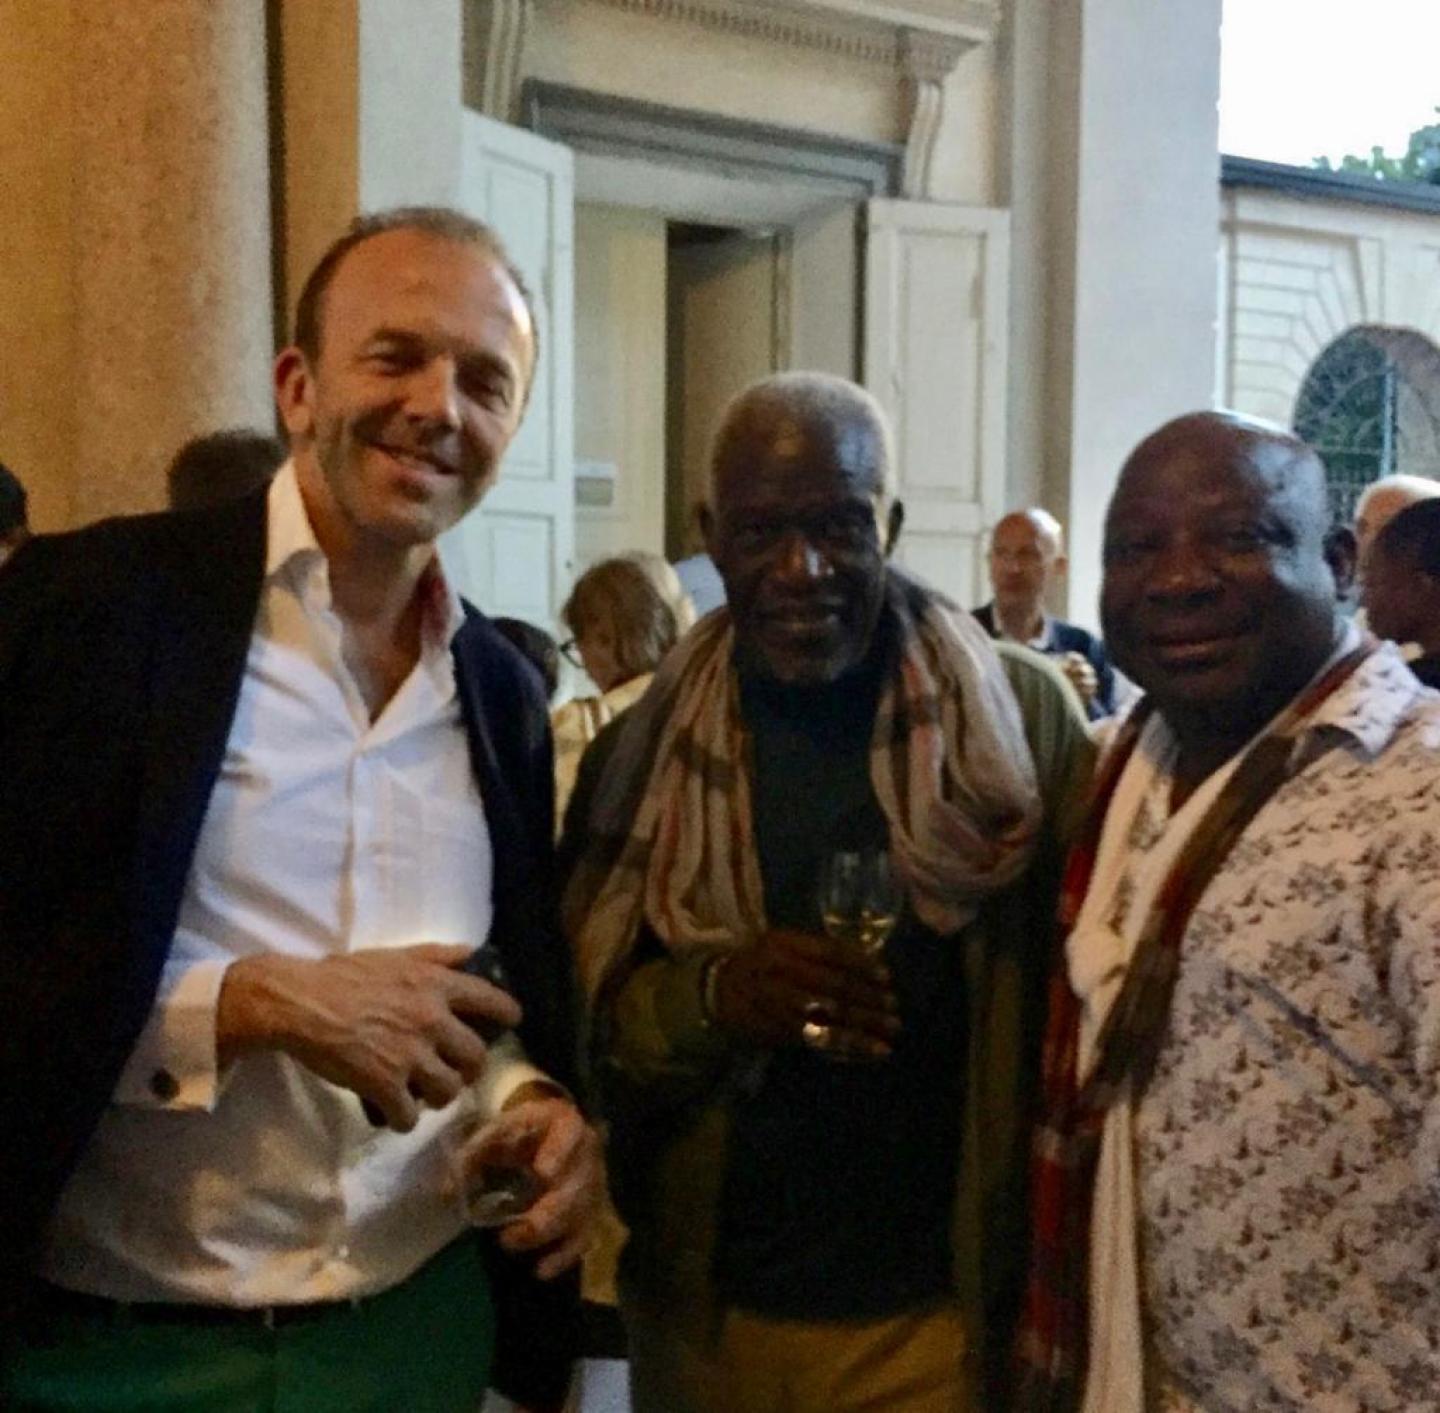 Thierry Barbier-Mueller, Barthelemy Toguo et Georges Adeagbo